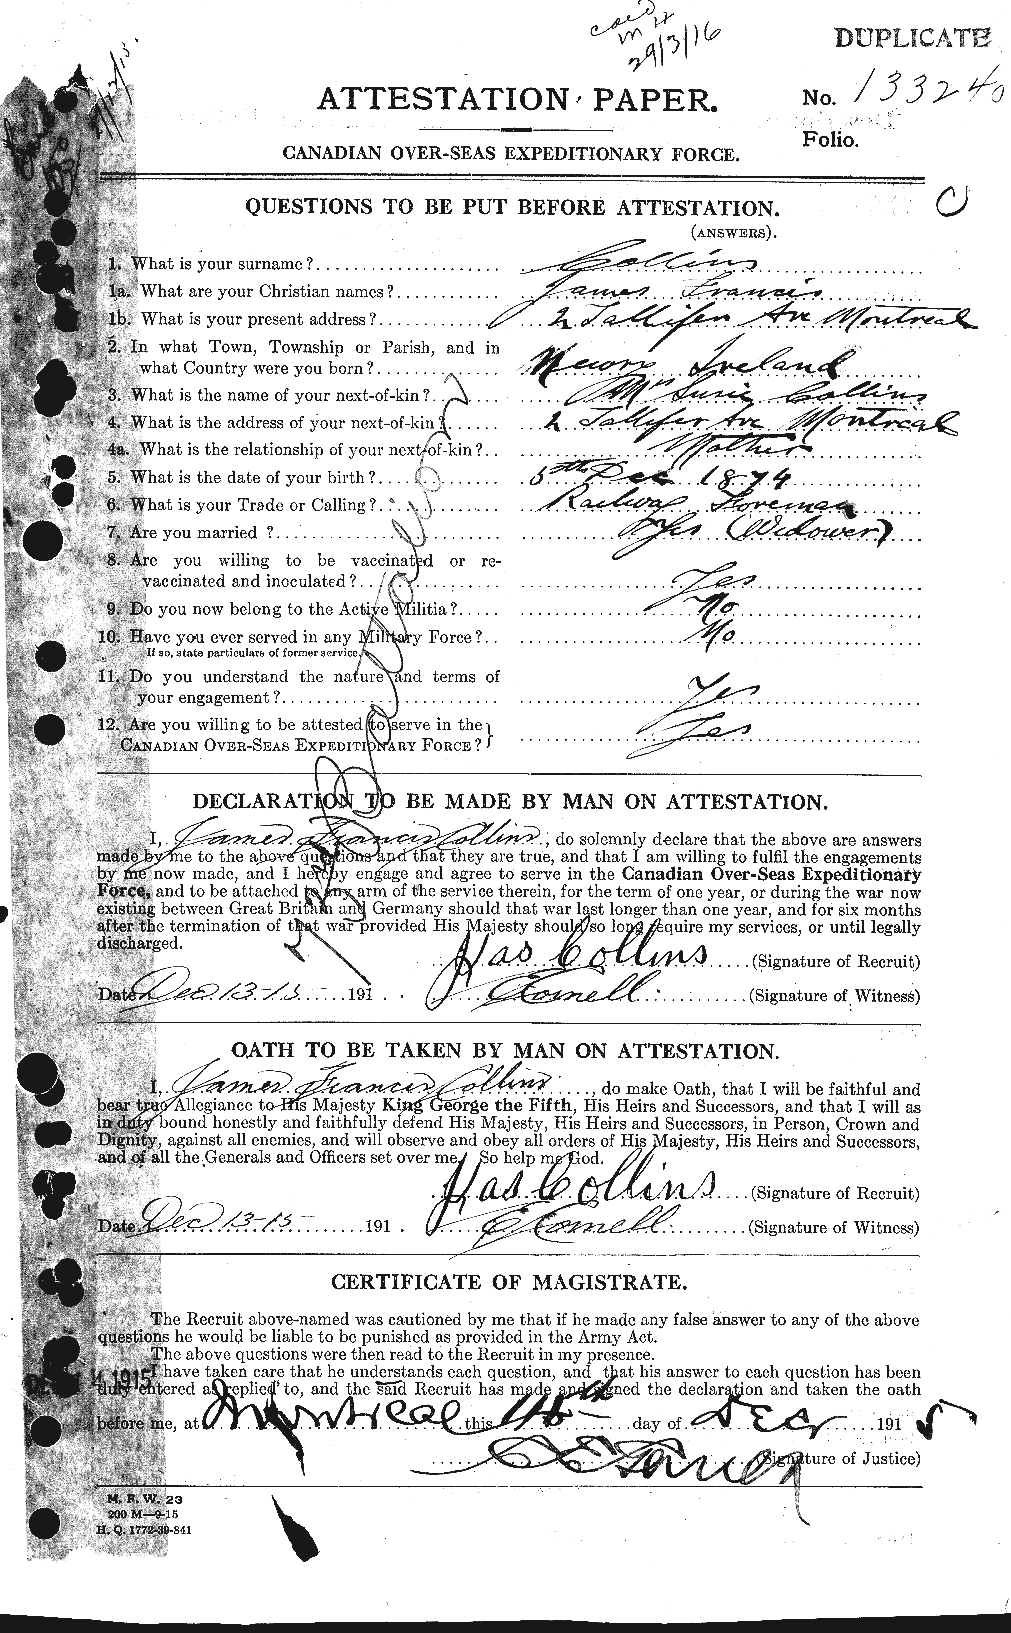 Personnel Records of the First World War - CEF 069951a